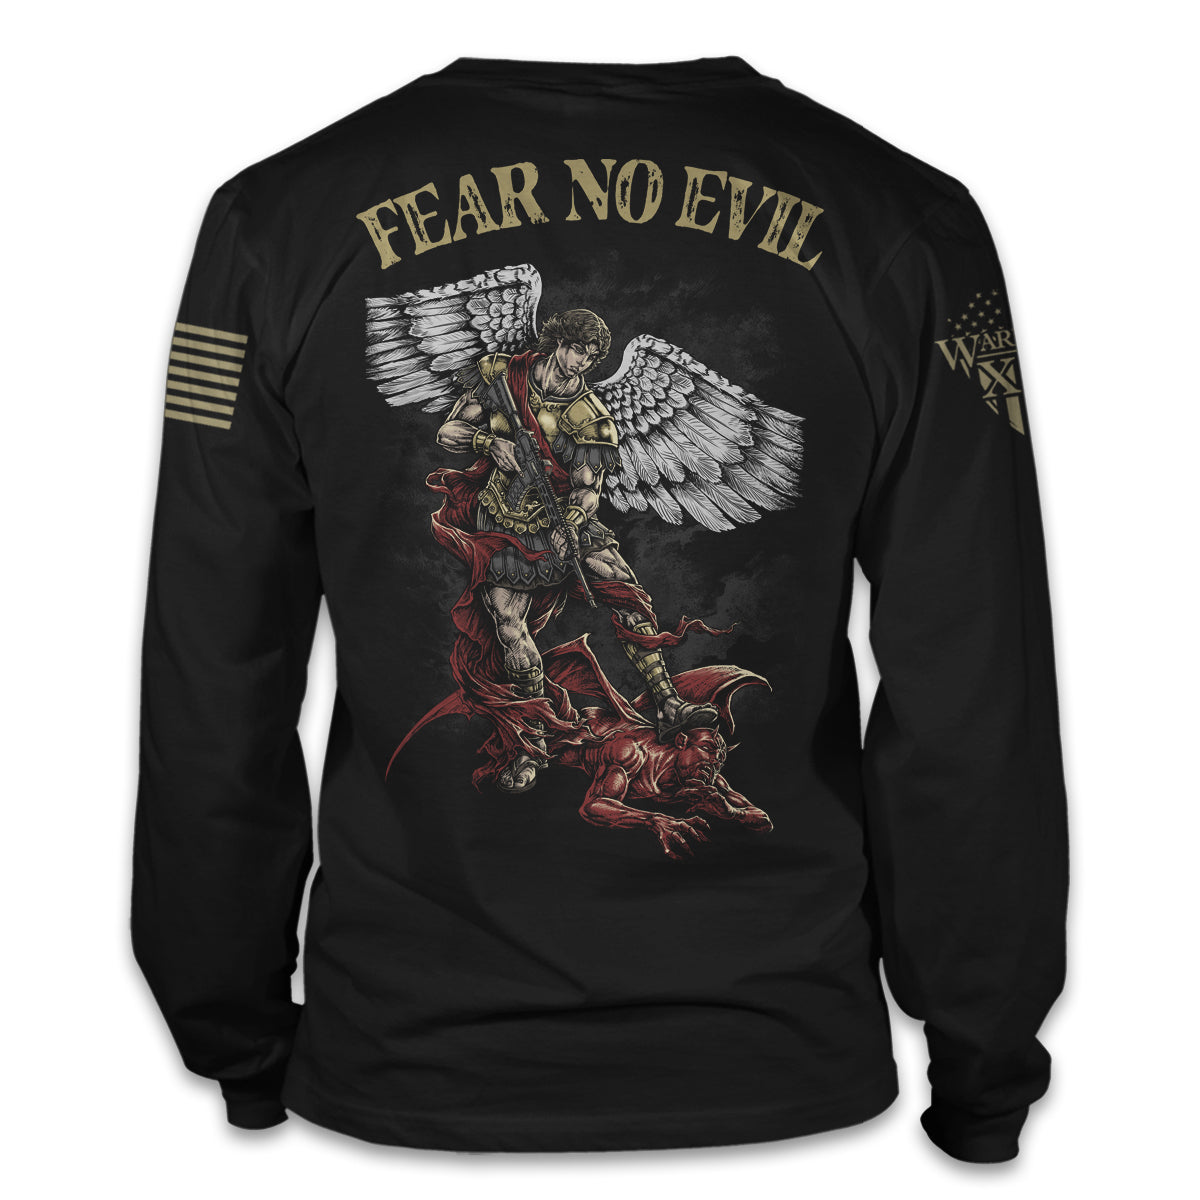 A black long sleeve shirt with the words "fear no evil" with a Saint Michael the Archangel holding a gun with his foot on Satan printed on the back of the shirt.